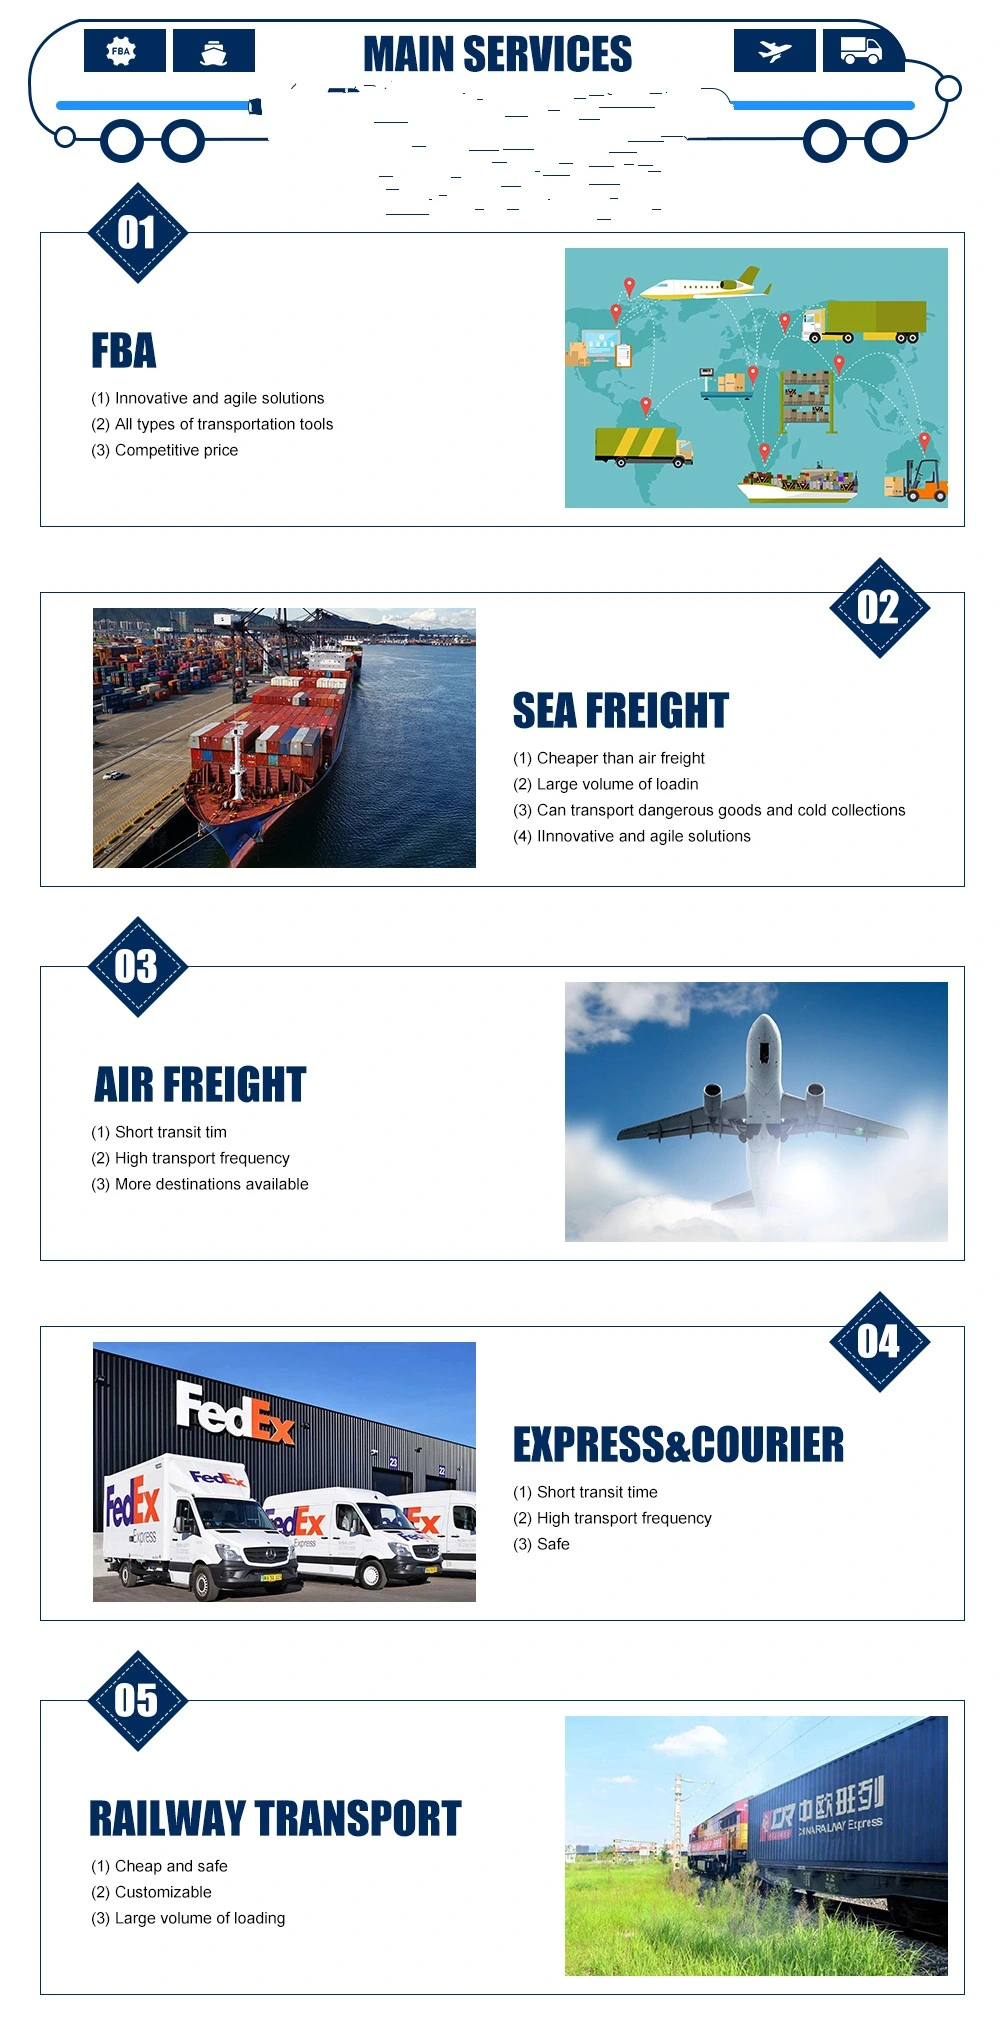 DDP Sea Shipping/Air Cargo/Railway Train Freight Forwarder to Austria/Finland/Poland/Sweden/France/Netherlands Fba Amazon Export Agents Logistics Rates Express